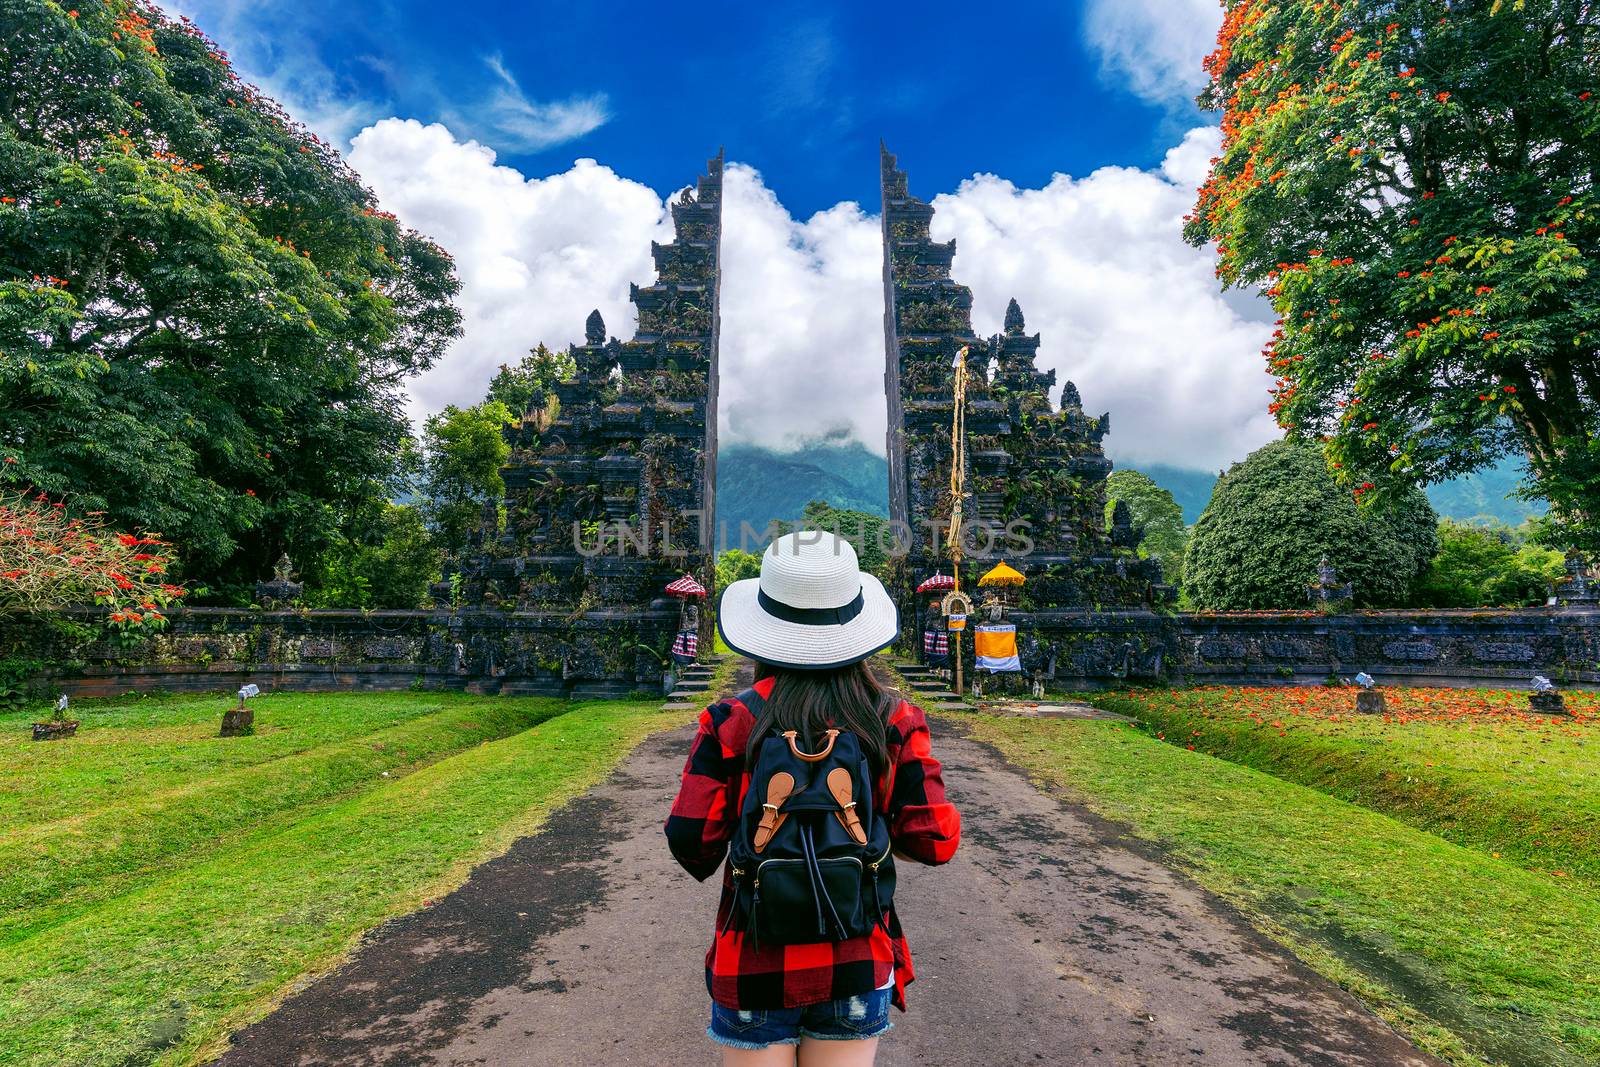 Woman traveler with backpack walking at Big entrance gate in Bali, Indonesia.